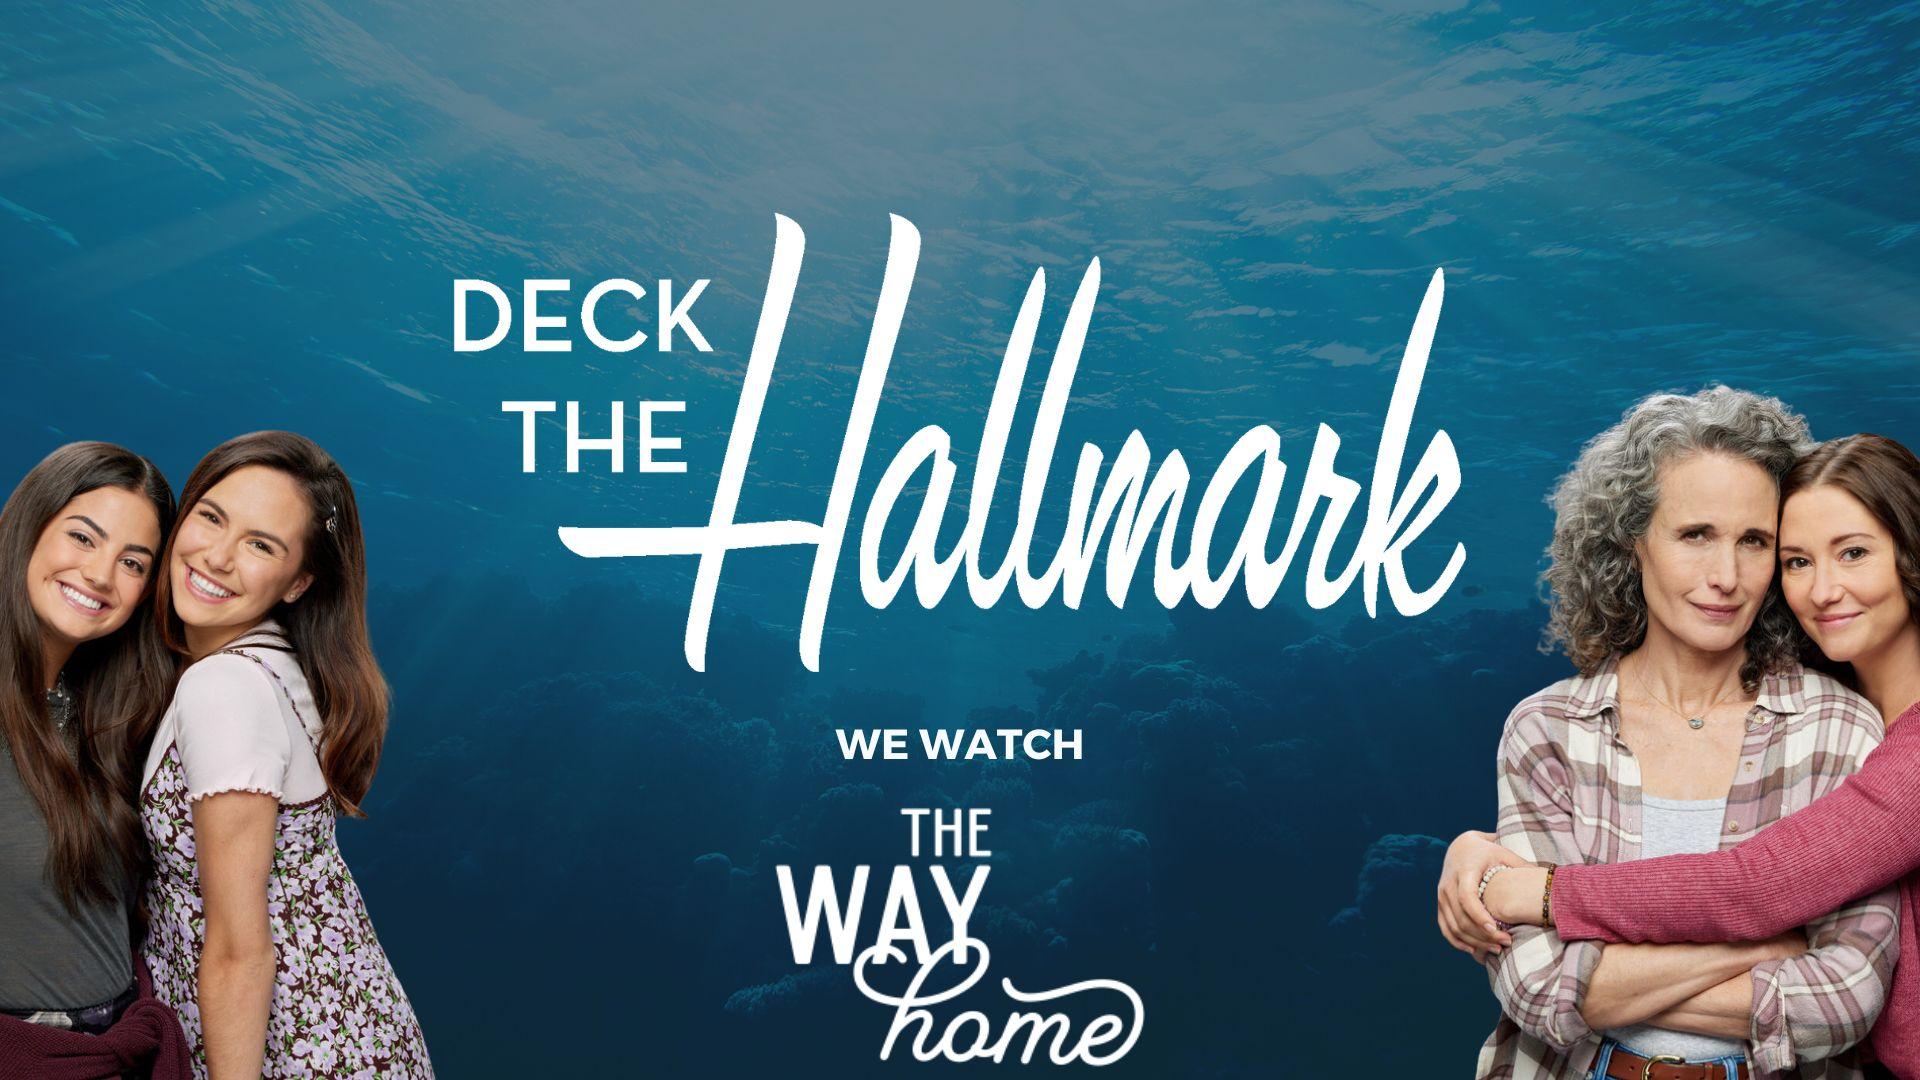 Watch Deck the Hallmark Presents We Watch “The Way Home" Streaming